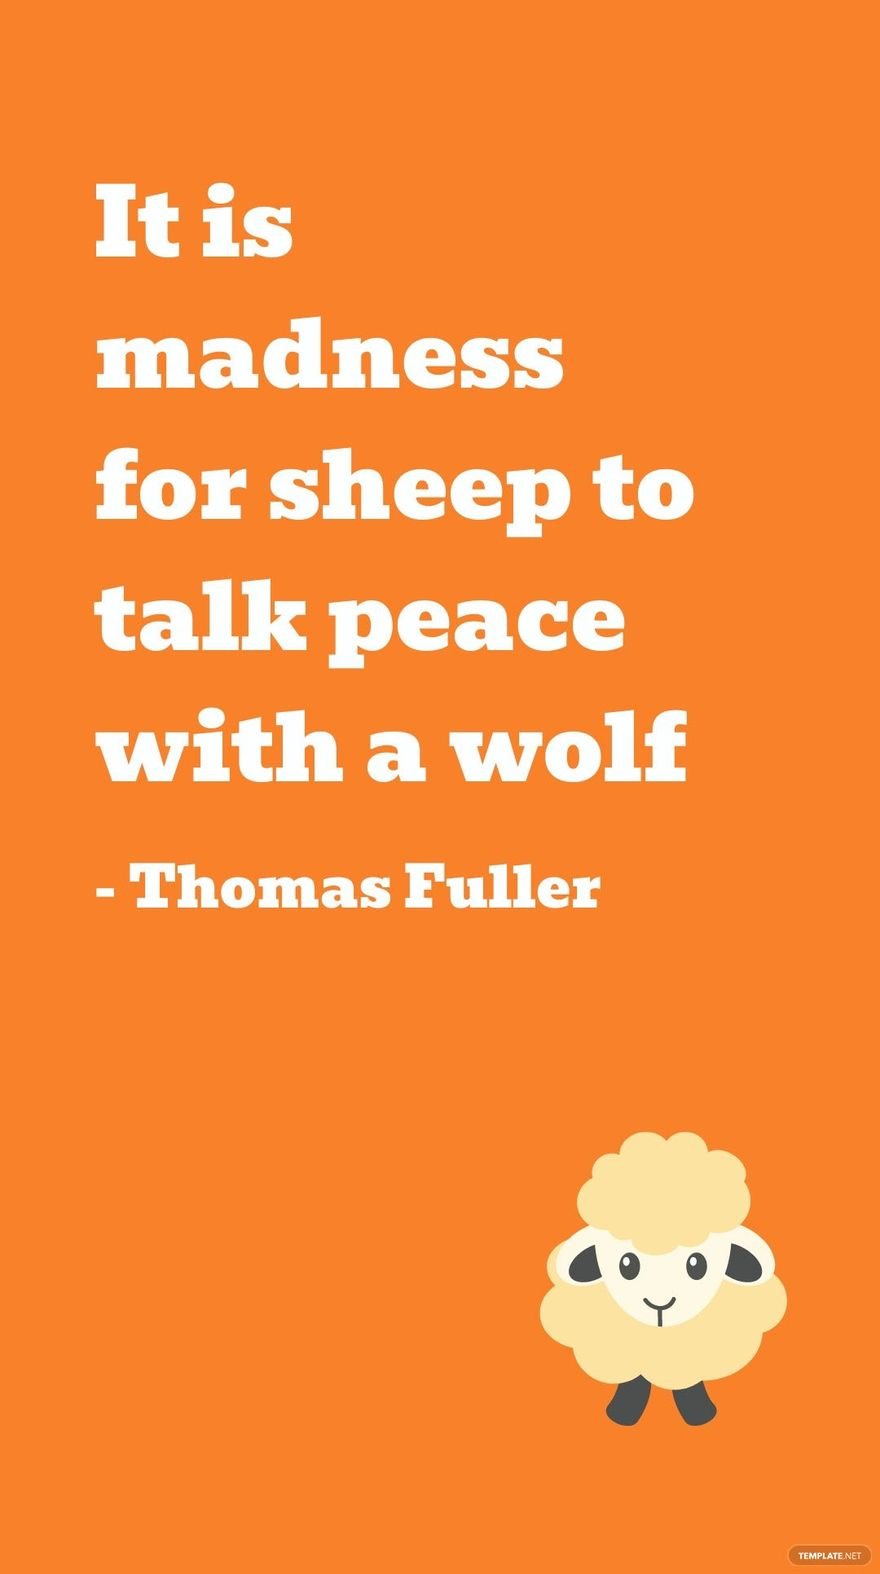 Thomas Fuller - It is madness for sheep to talk peace with a wolf in JPG